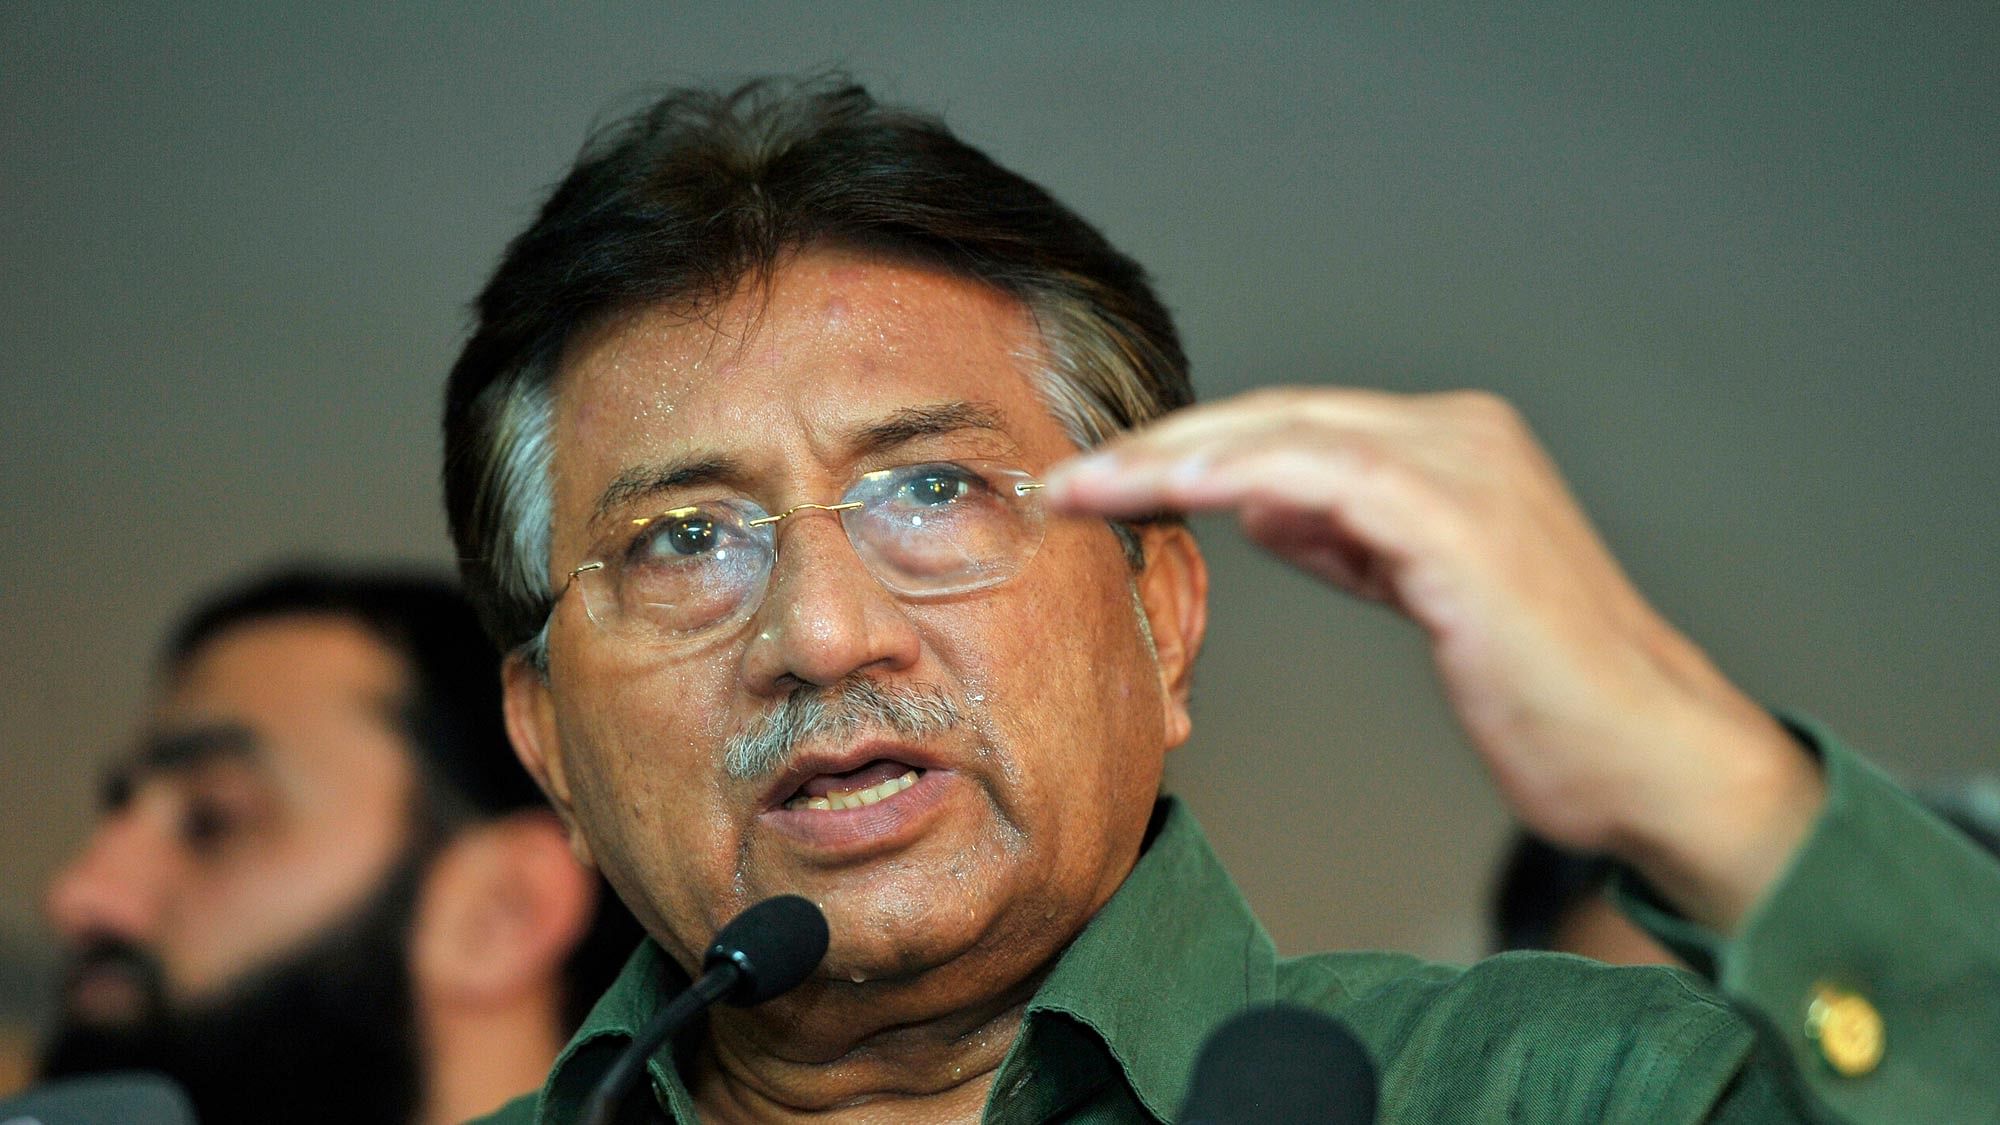 A three-member special court announced its verdict in the long-drawn high treason case against former military ruler Pervez Musharraf on 17 December.